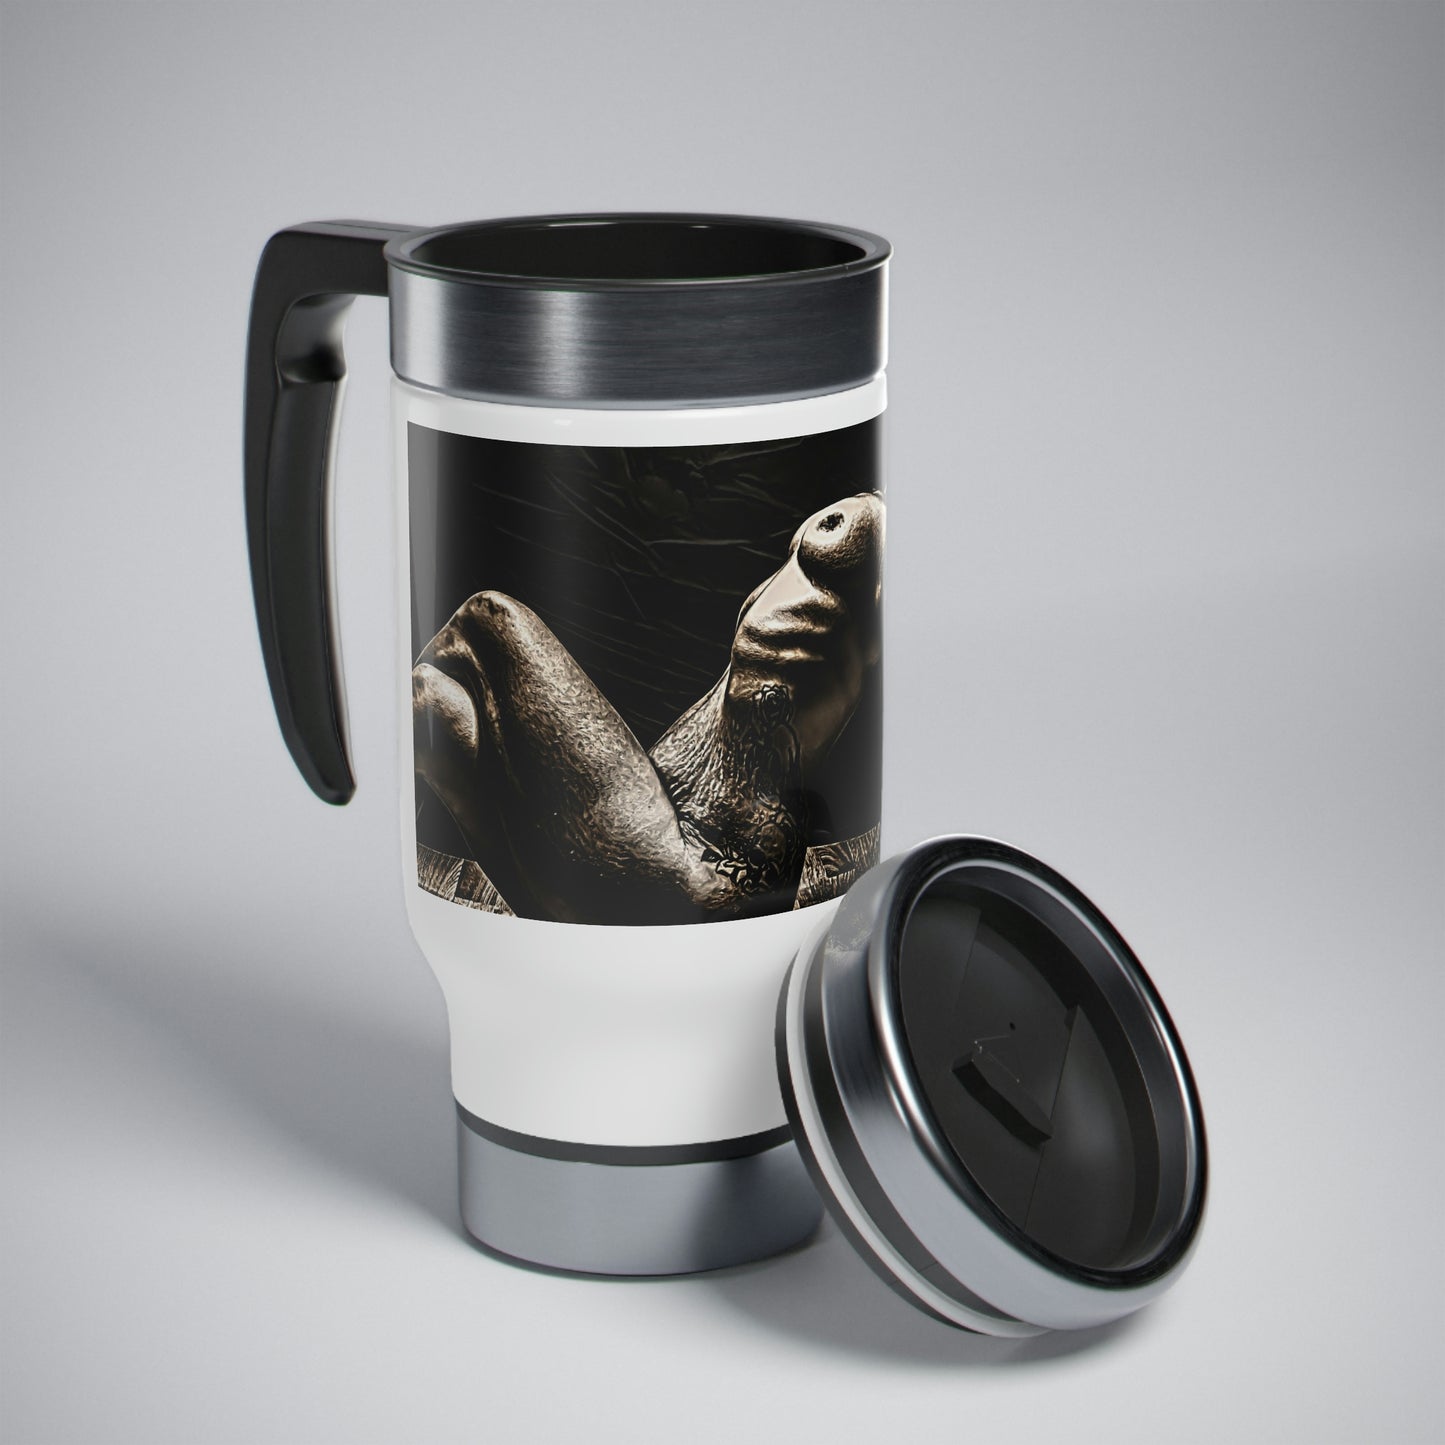 "Bronzed" Stainless Steel Travel Mug with Handle, 14oz